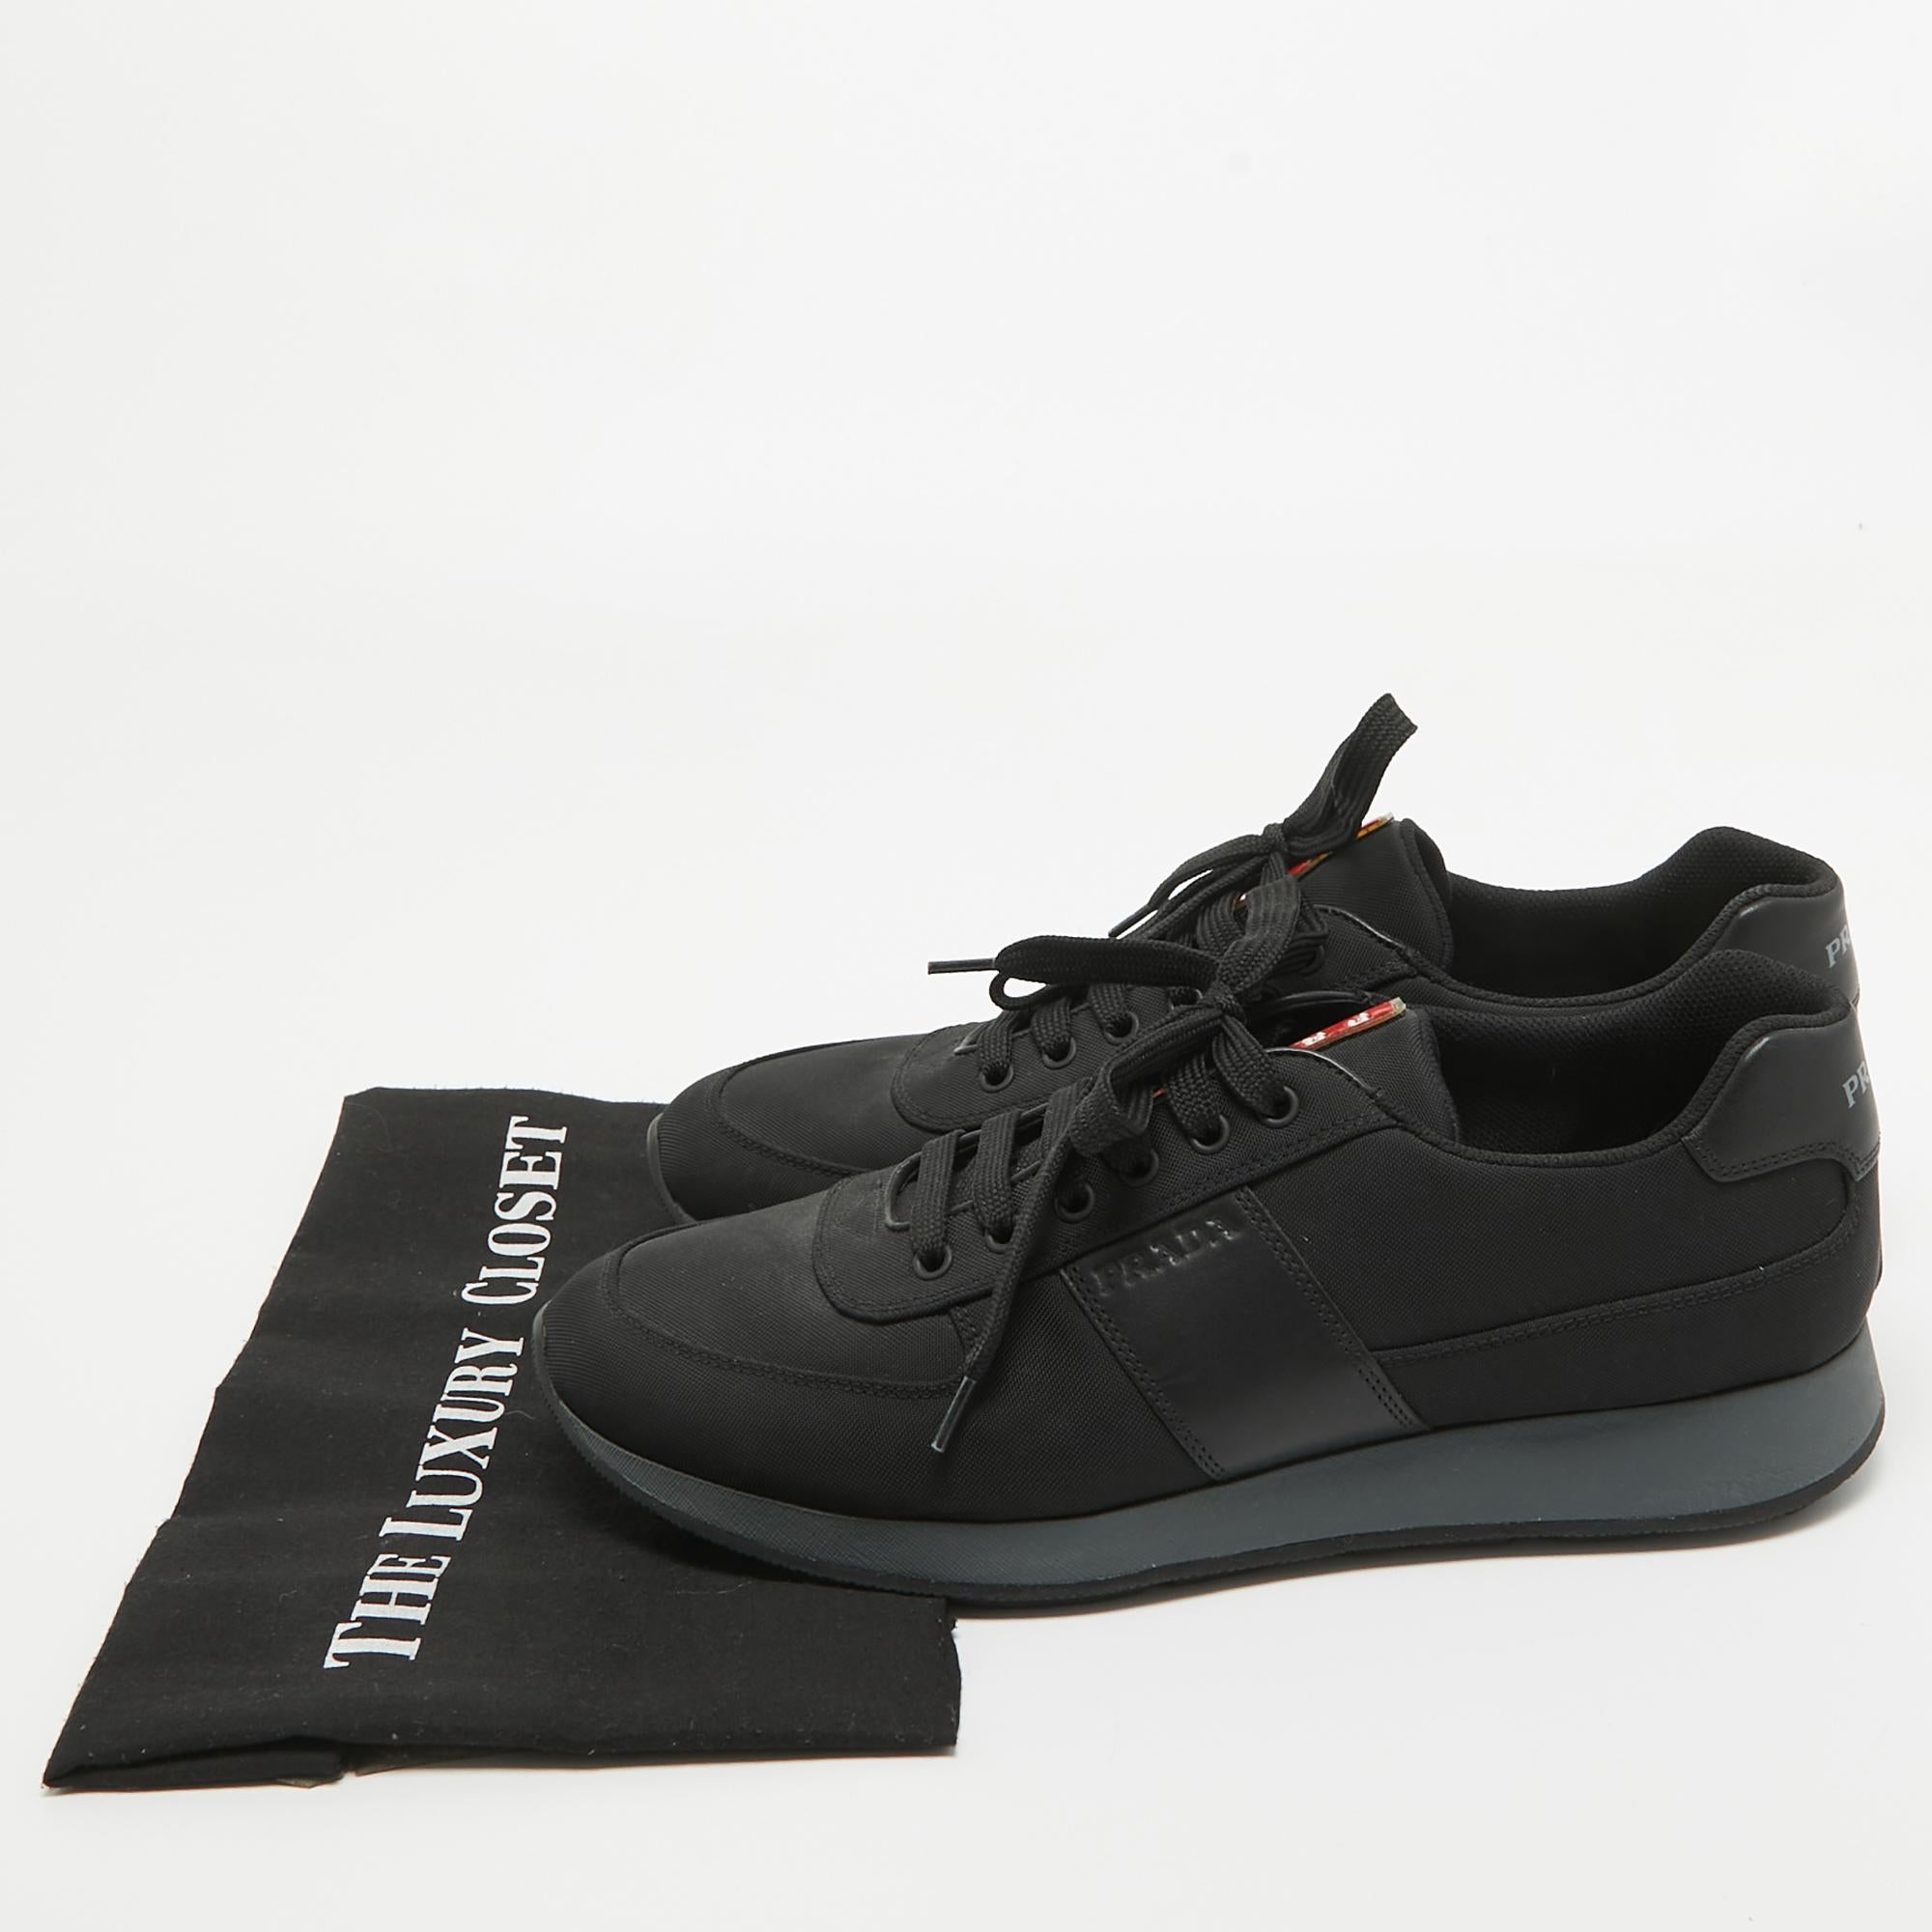 Prada Sport Black Canvas and Leather Low Top Sneakers Size 44 5